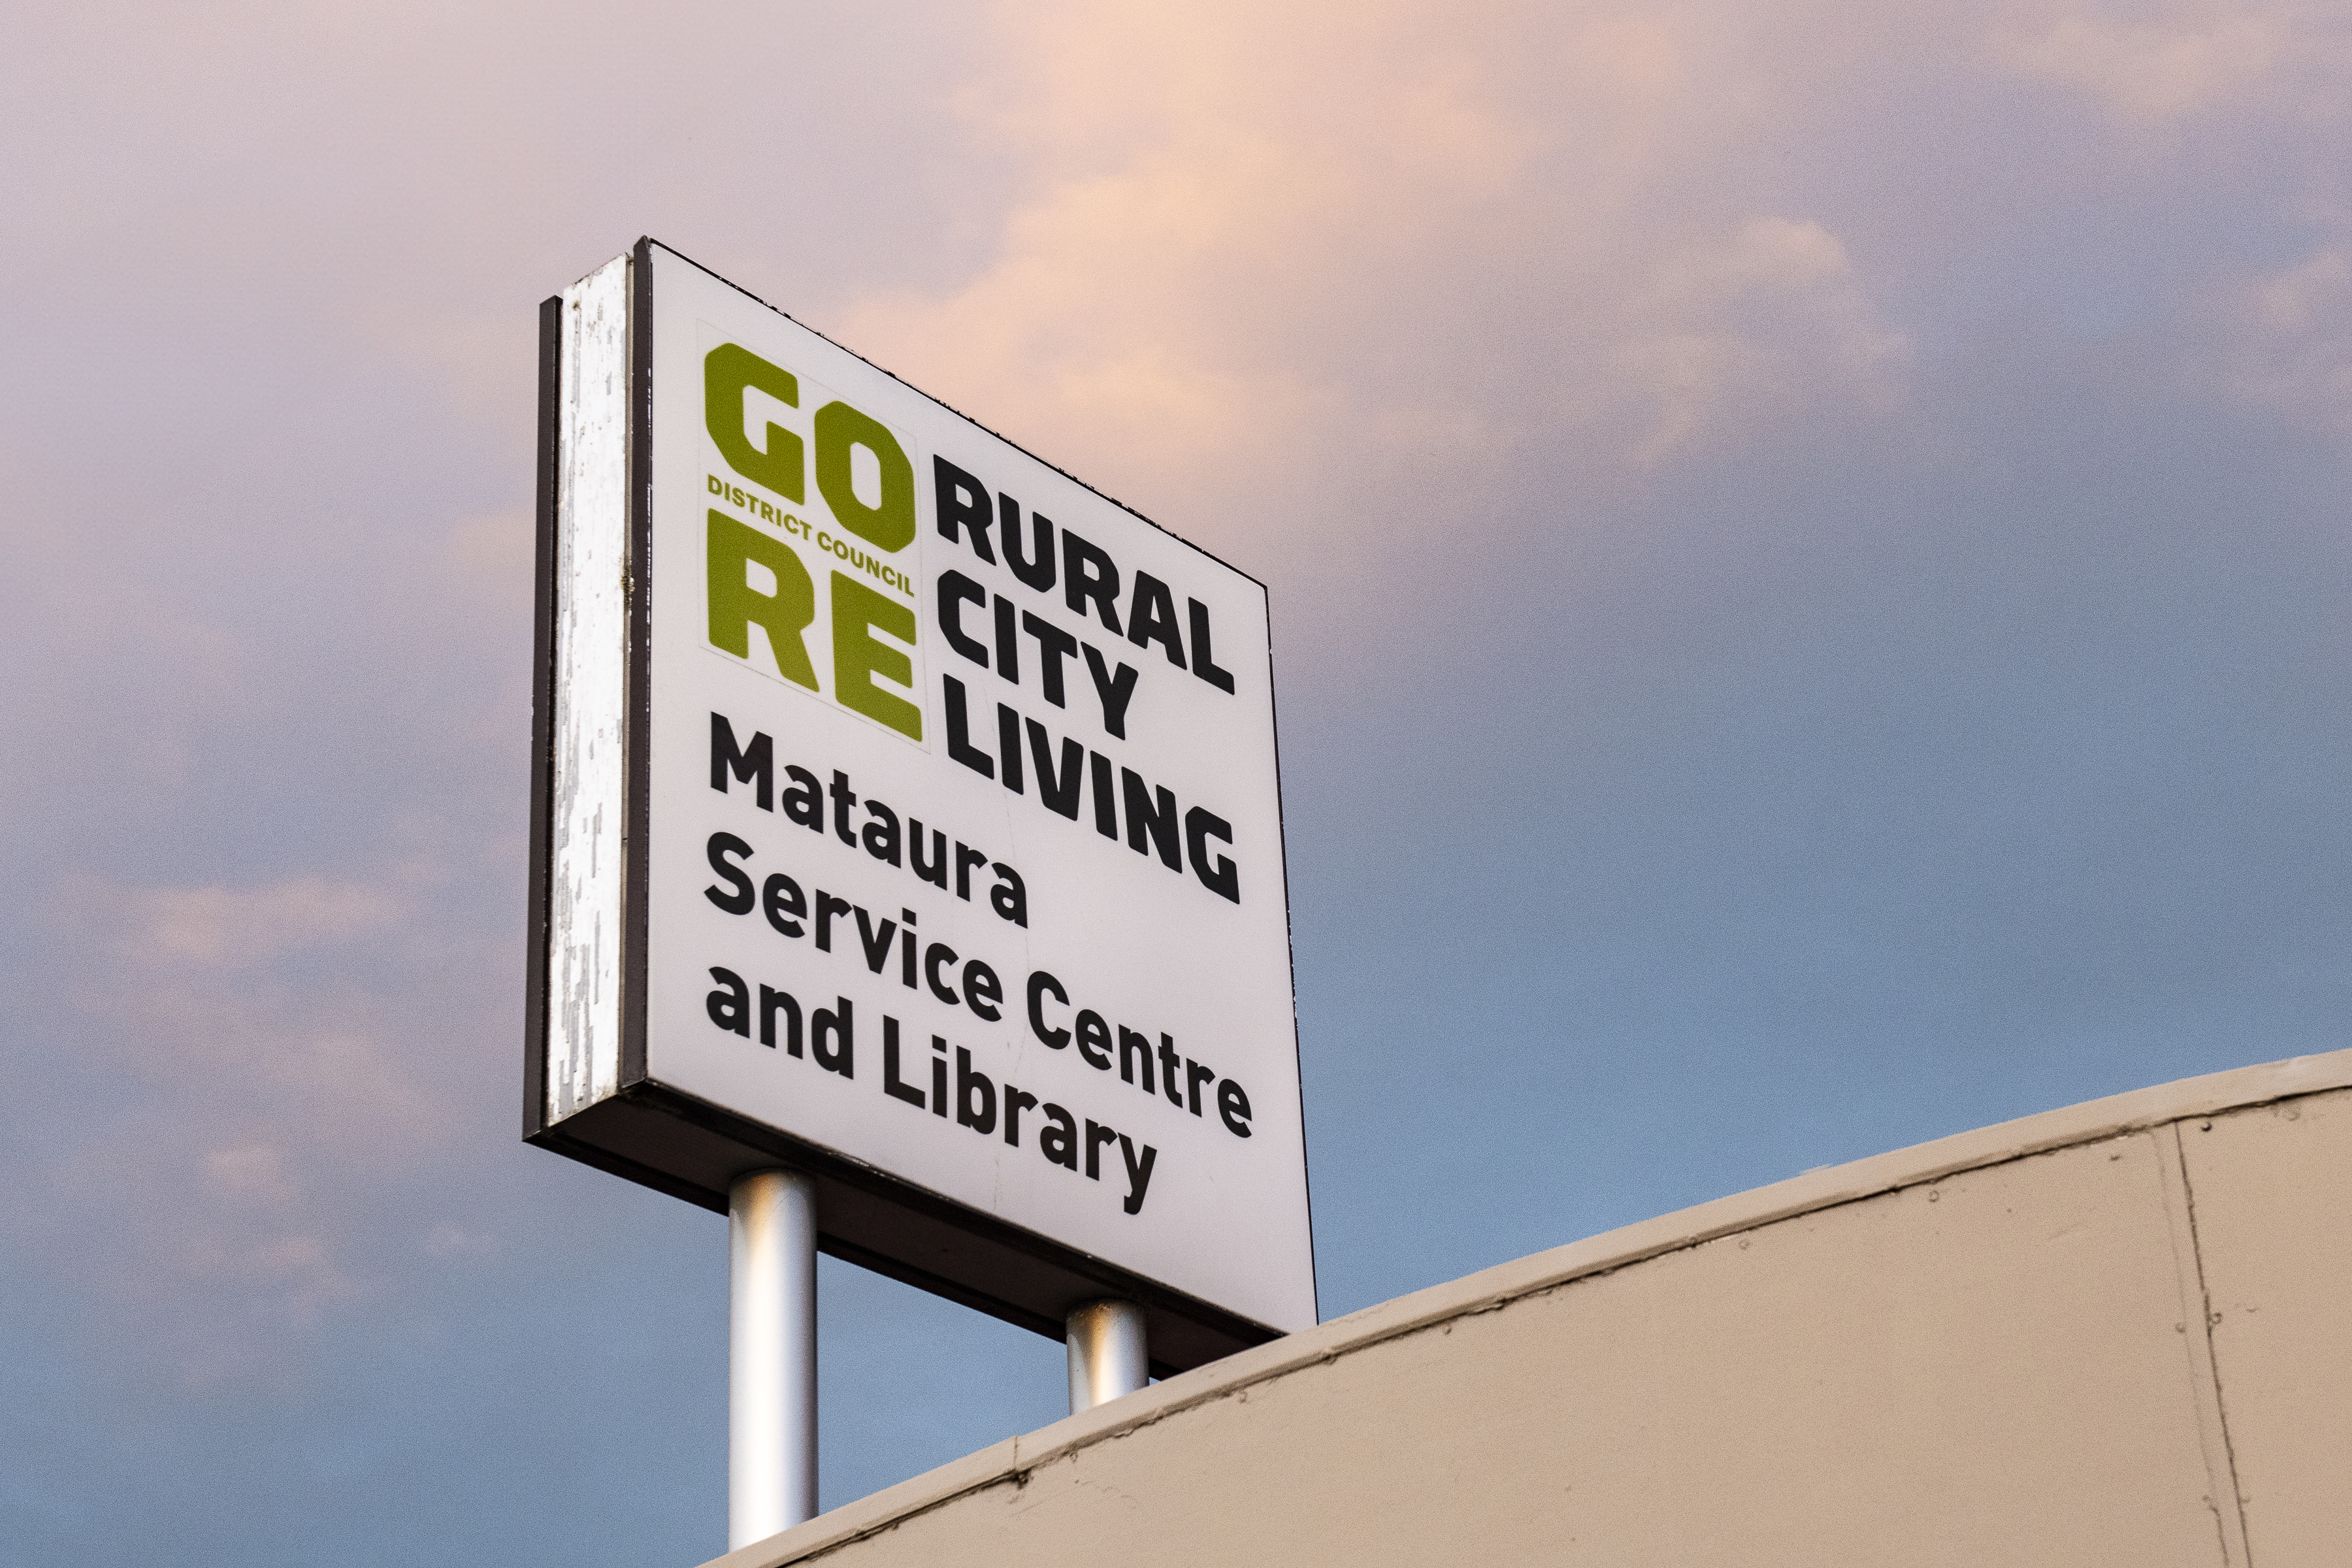 The sign above the Mataura Library and Service Centre